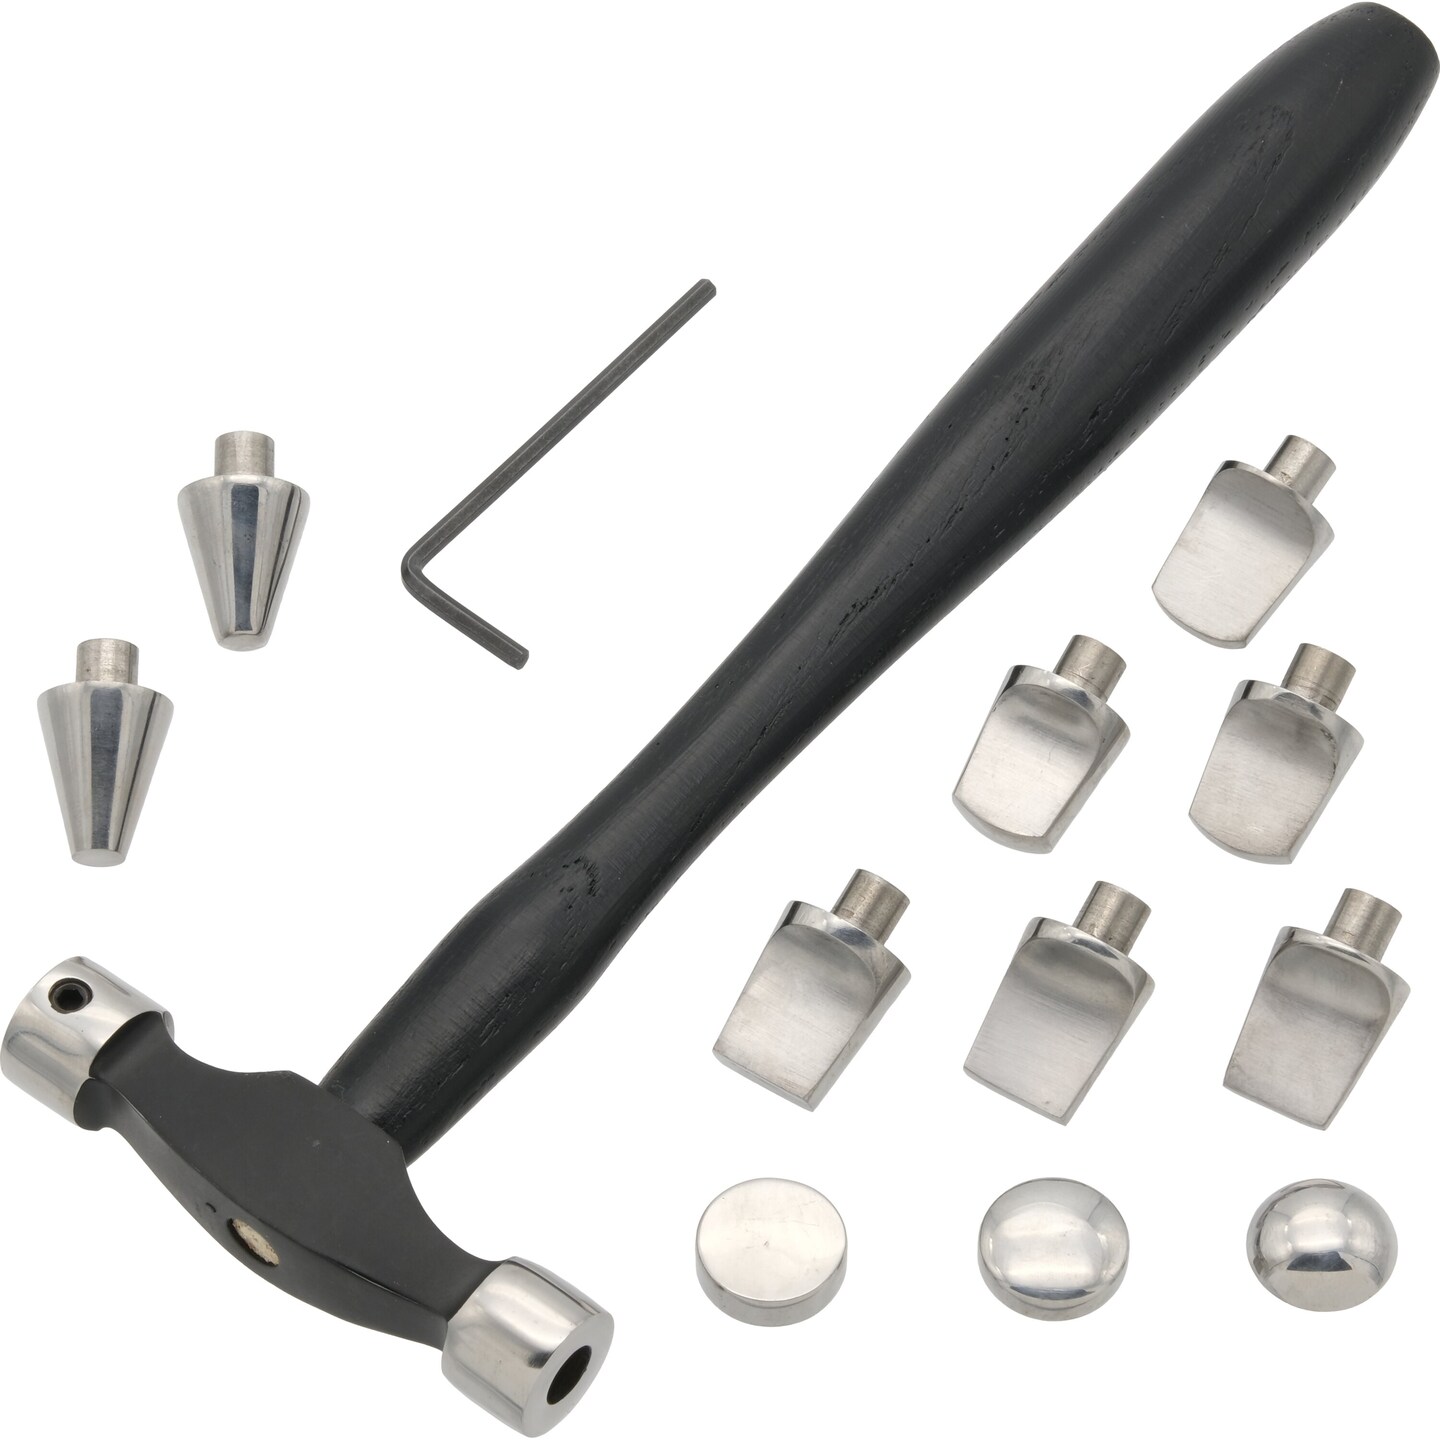 Small Precision Hammer Set with 11 Interchangeable Heads for Gold and Silver